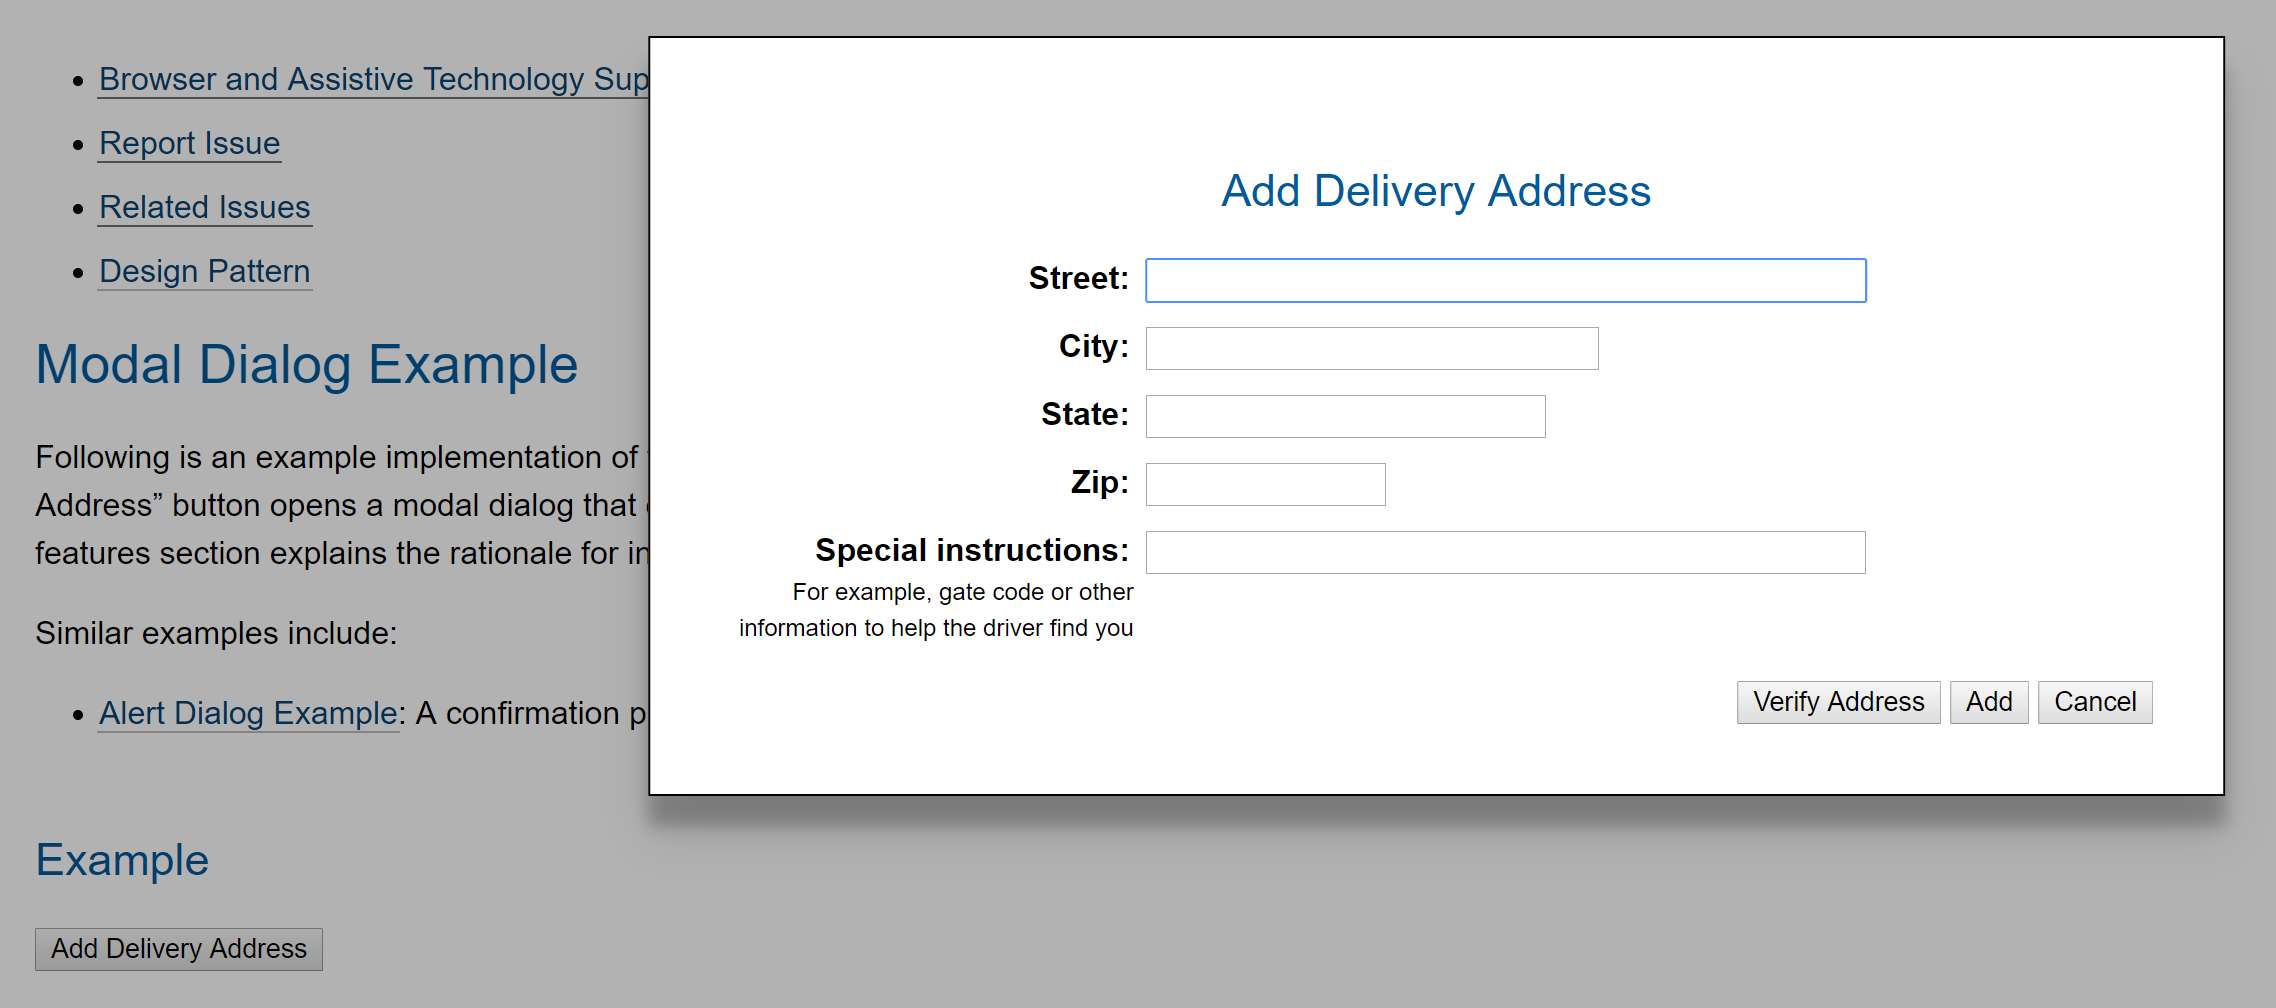 example modal dialog with street, city, state, zip, and instruction fields